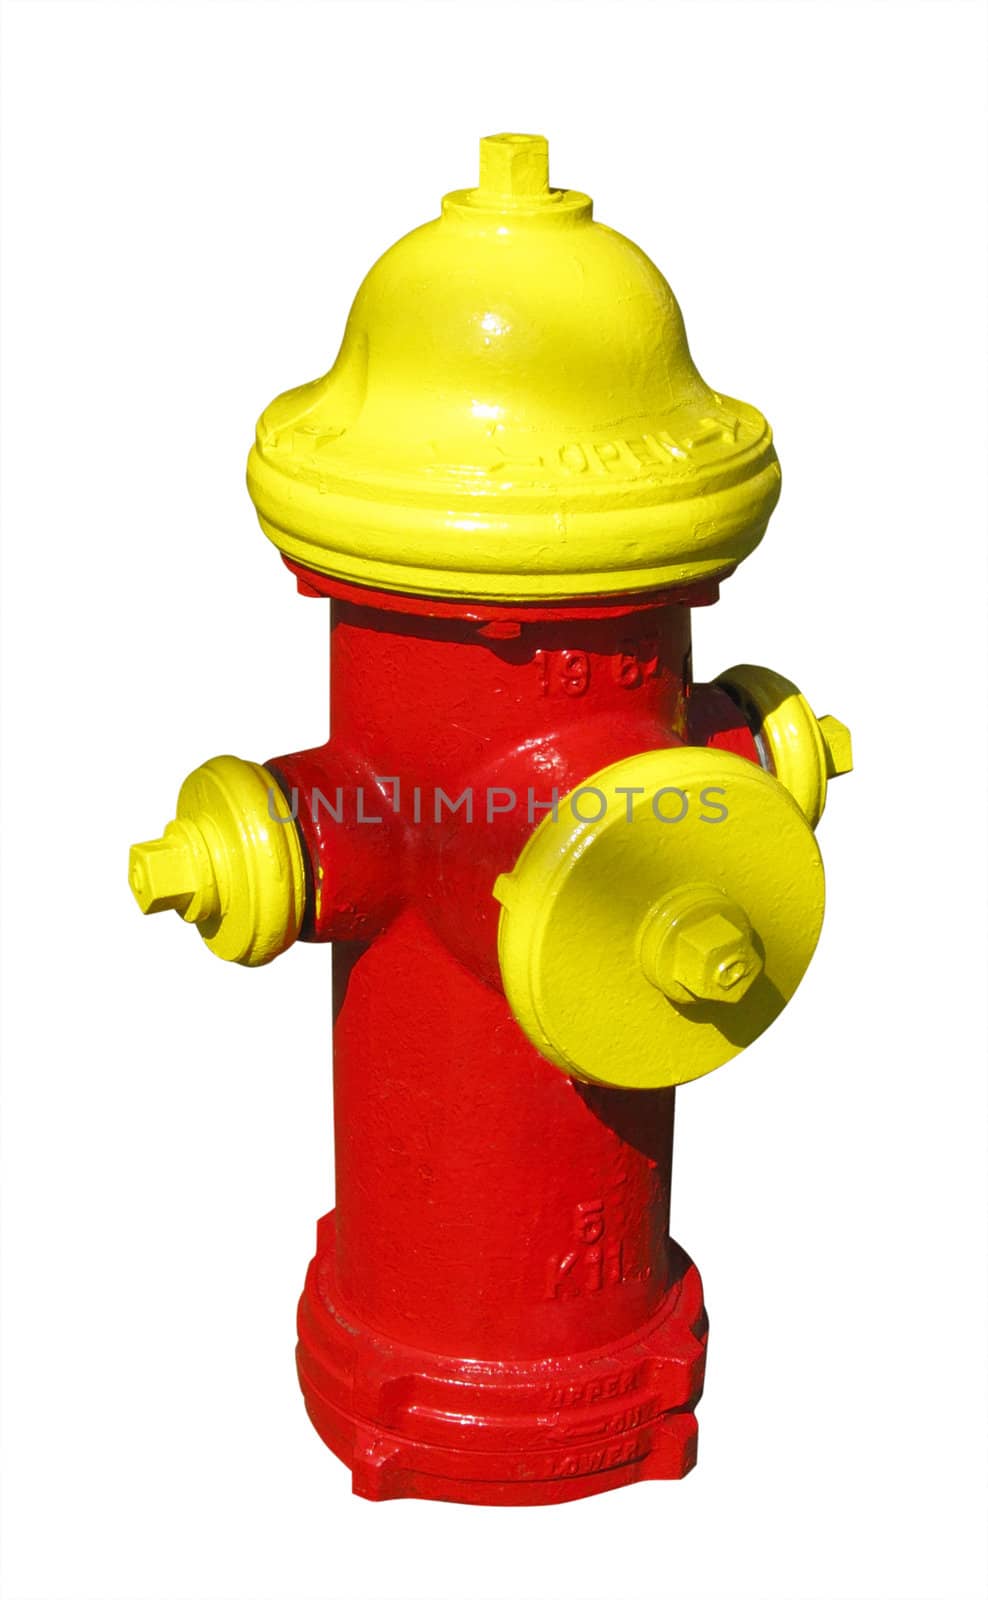 Fire hydrant painted in red and yellow so it can easily be seen near shrubs or snow